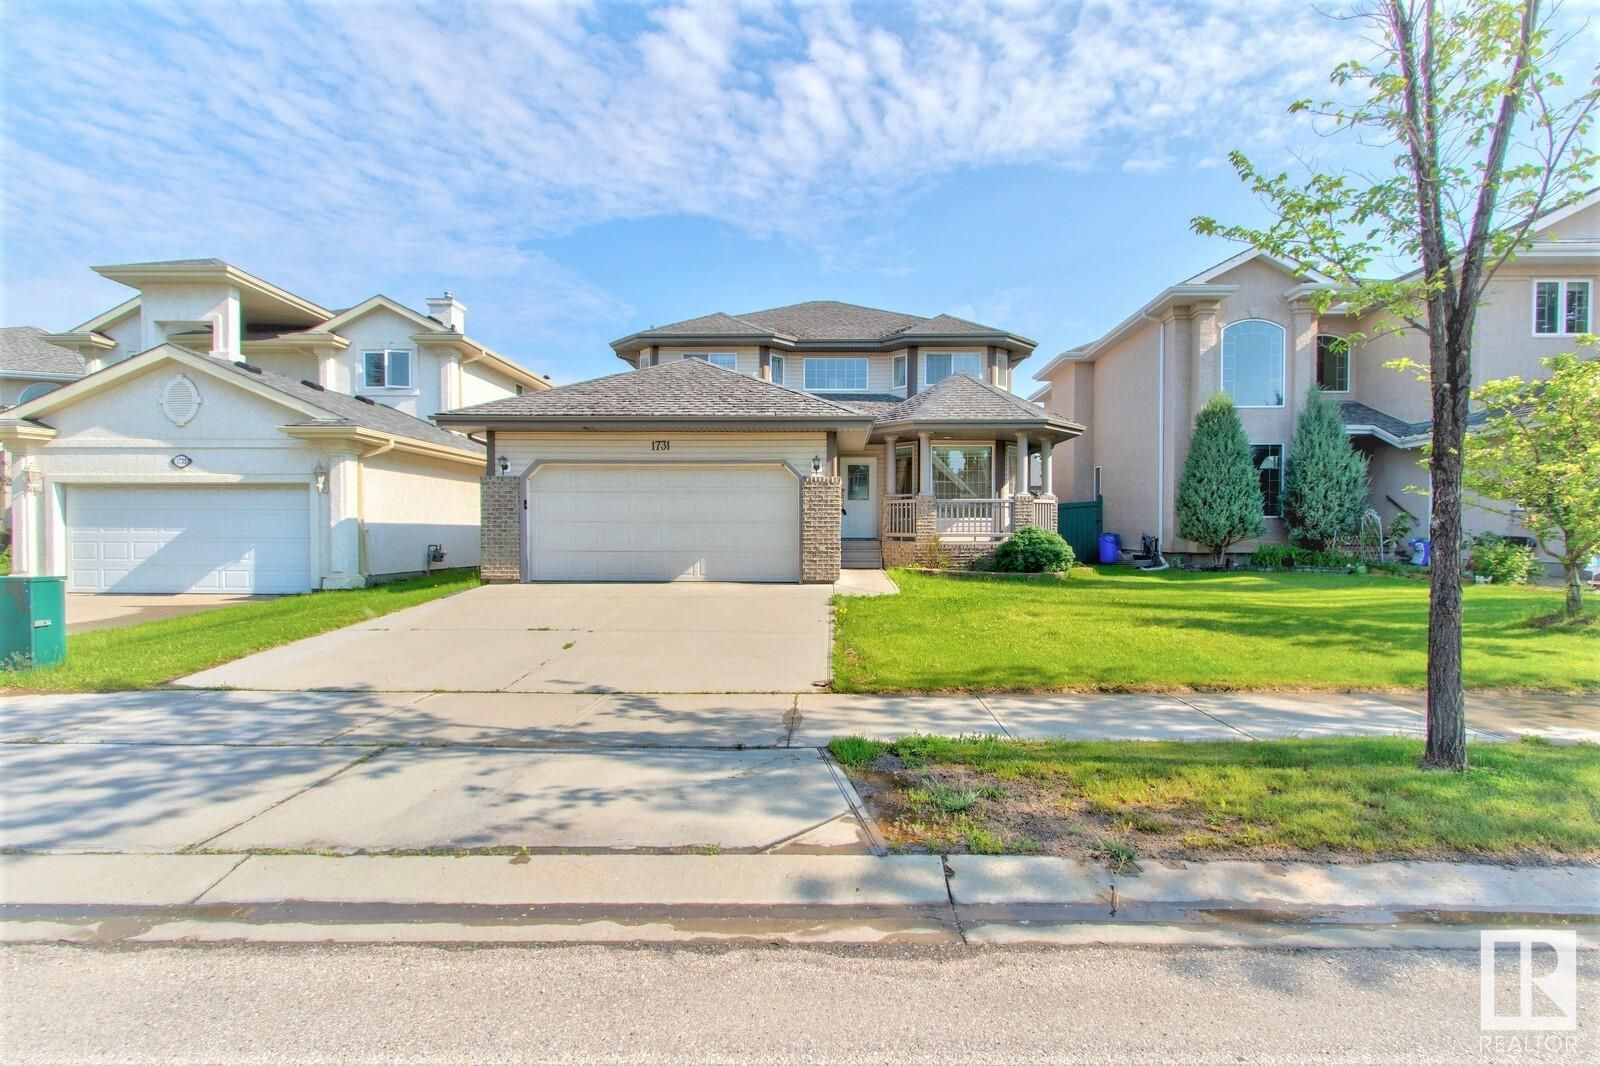 Main Photo: 1731 HASWELL Cove in Edmonton: Zone 14 House for sale : MLS®# E4300366